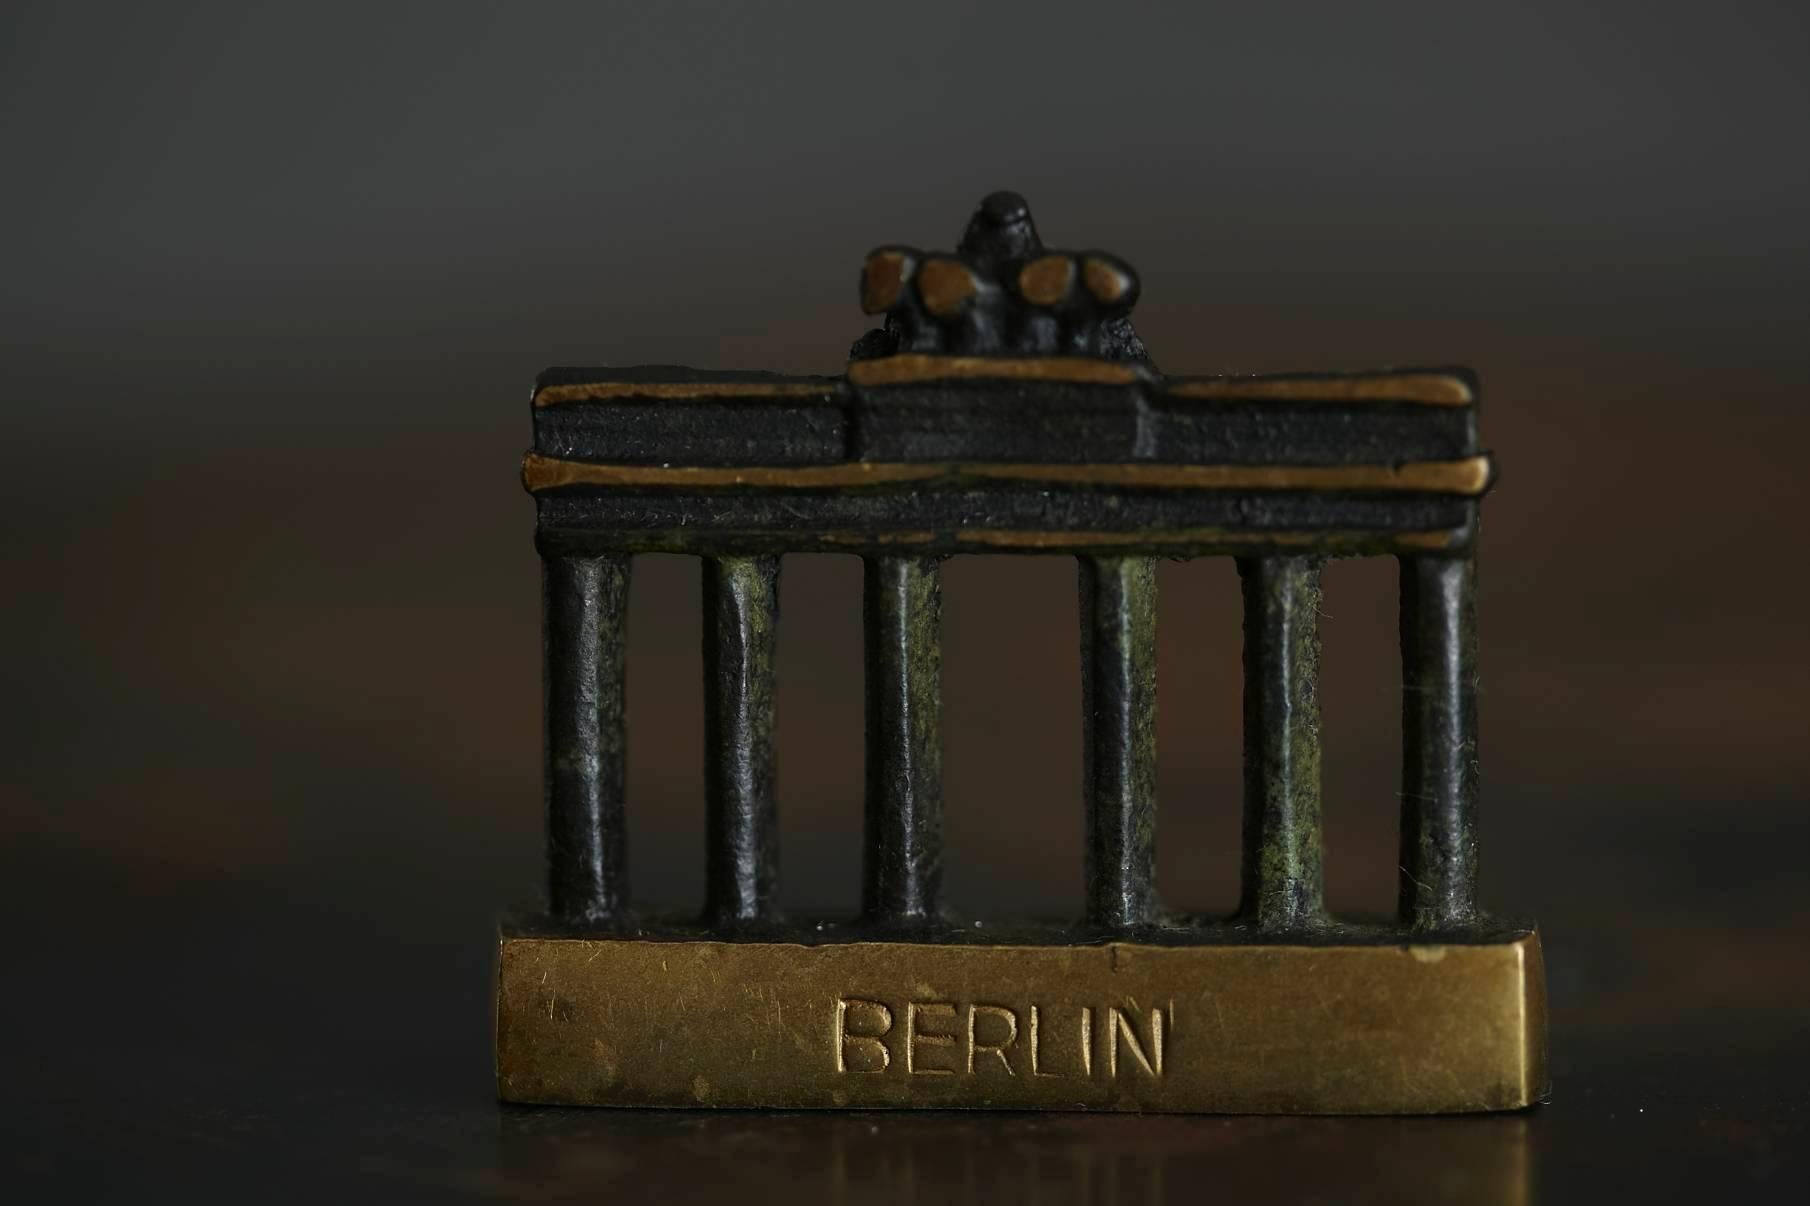 A very charming little brass figurine showing the symbol of Berlin, the famous Brandenburg Gate, in the style of the Walter Bosse designs in brass, circa 1960s.